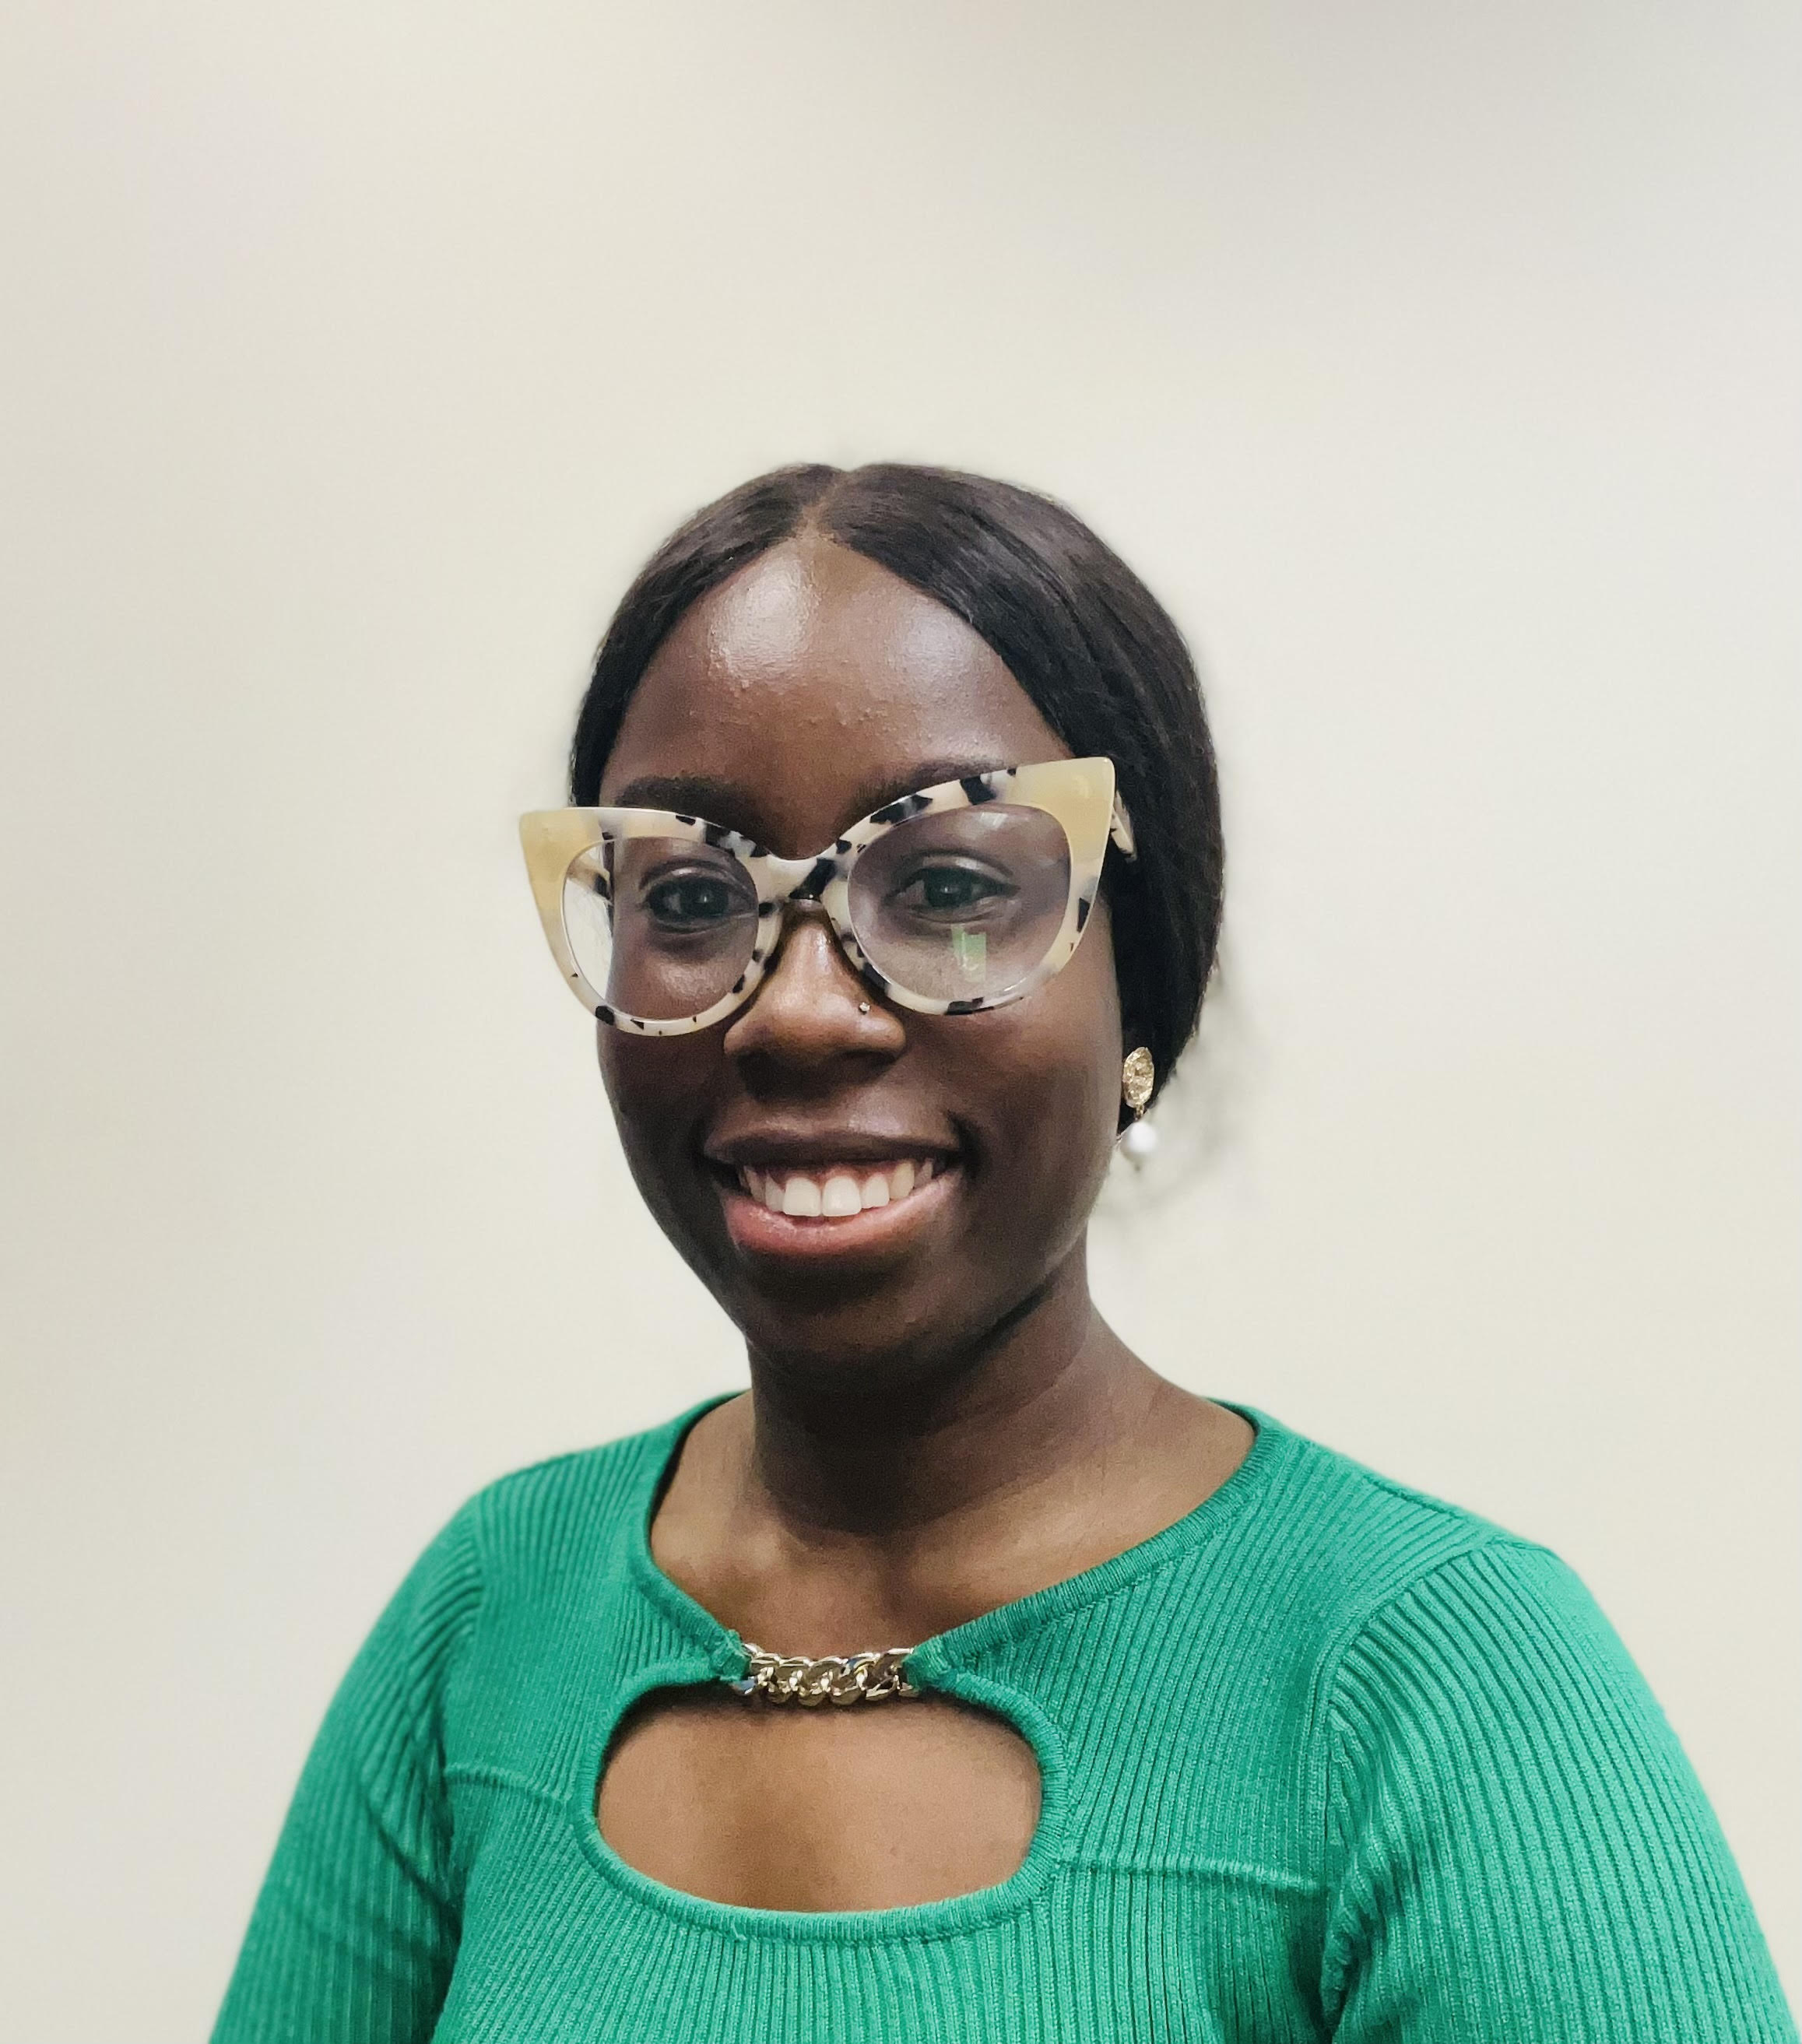 Hawa smiles at the camera wearing a grass-green long sleeve top. She is wearing tan and black spotted cat-eye-shape glasses.